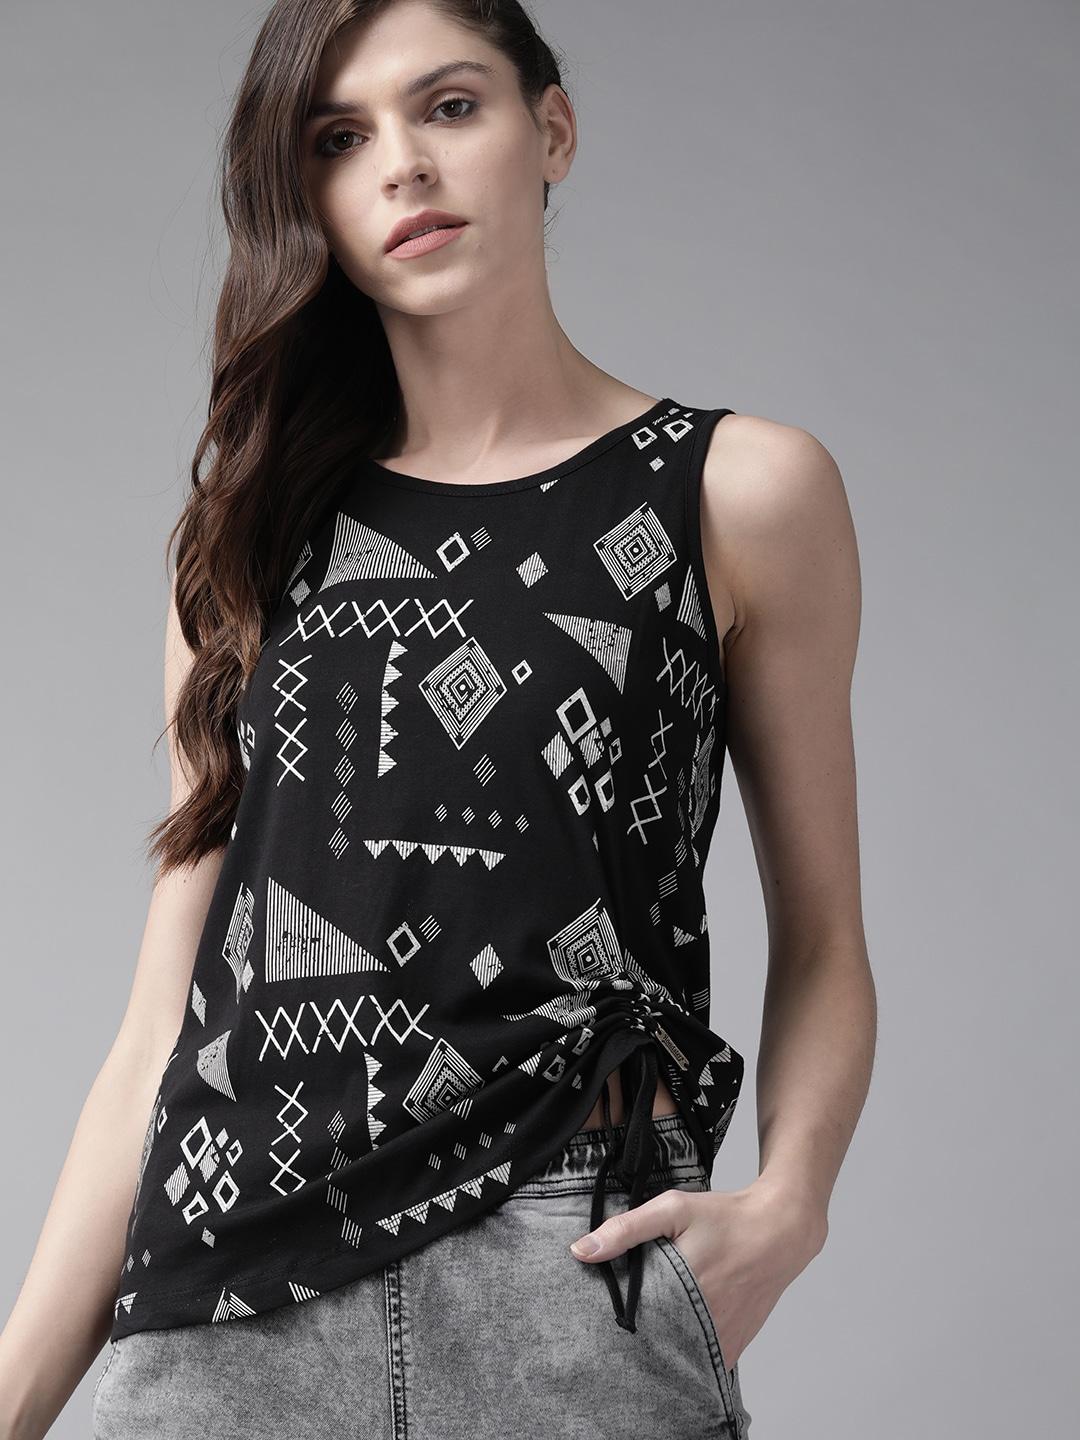 the-roadster-lifestyle-co-women-black--off-white-printed-pure-cotton-top